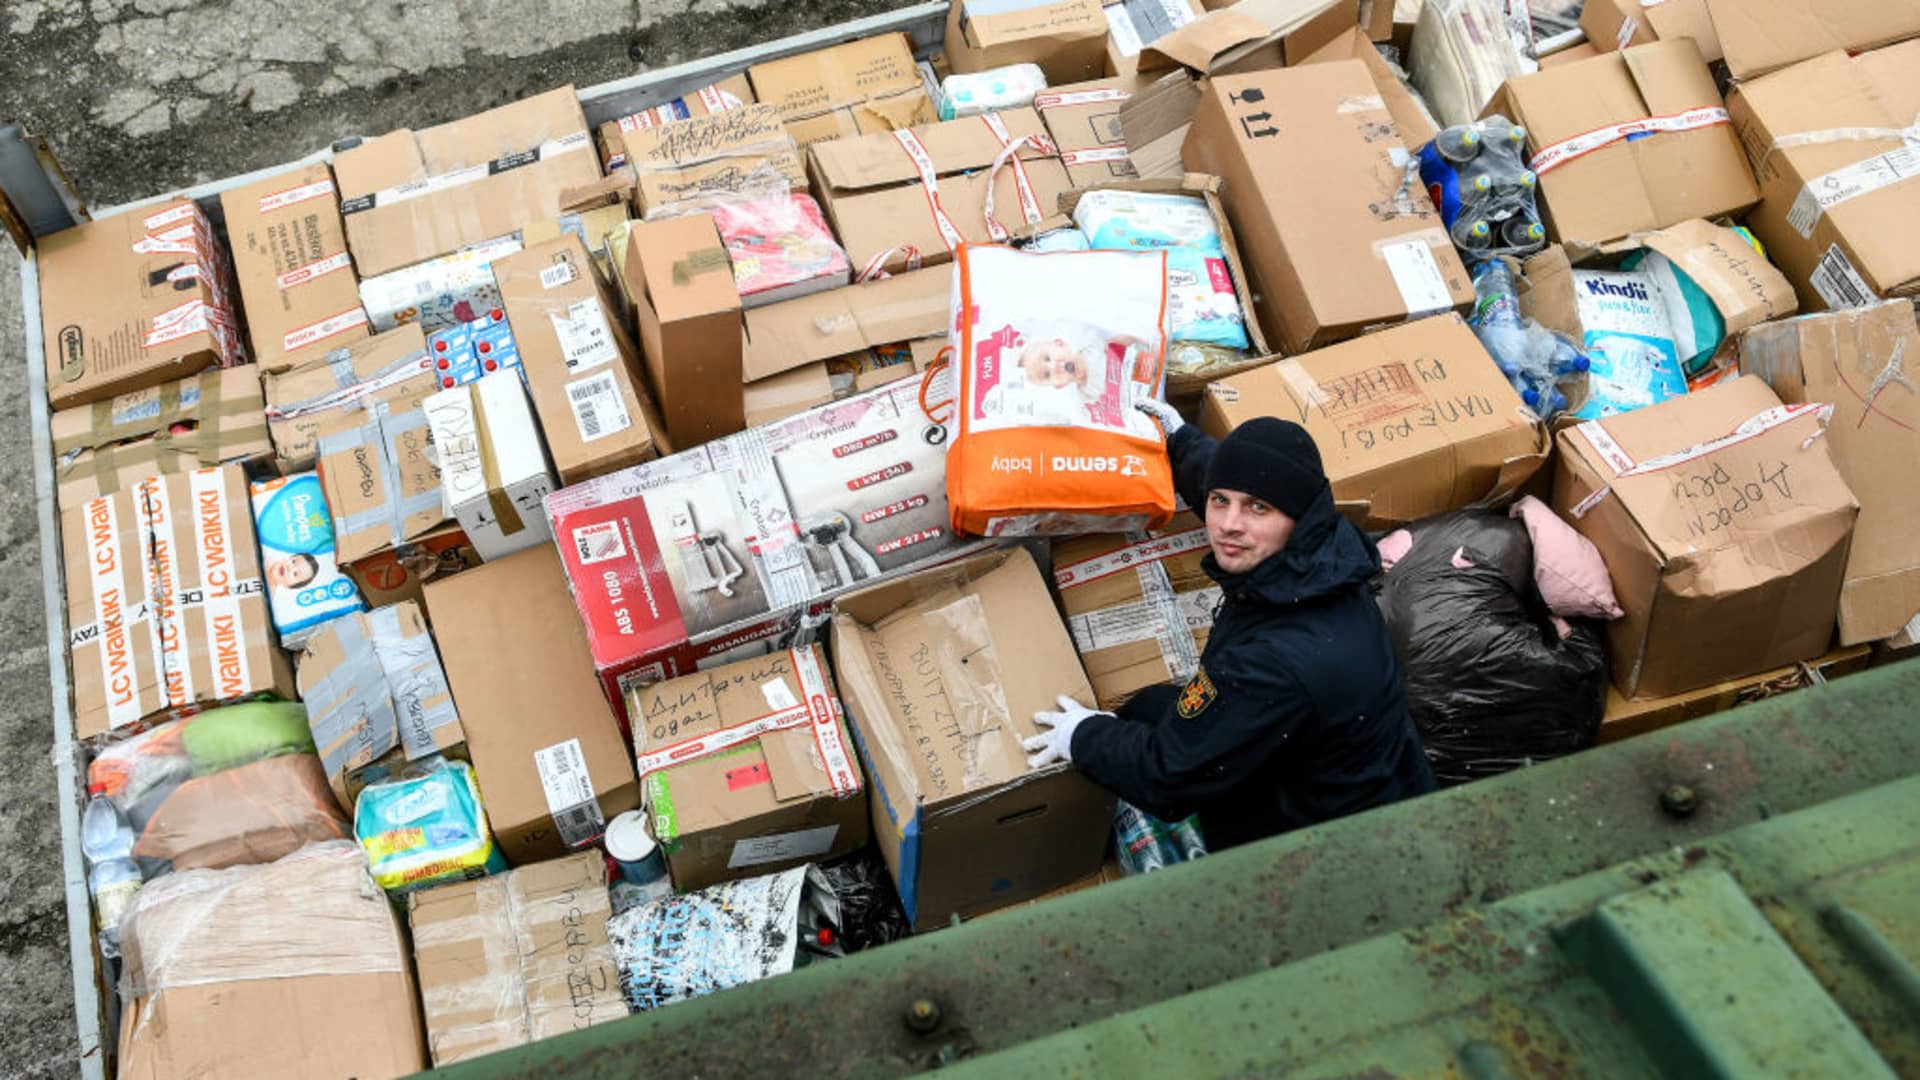 Volunteers and team members carry humanitarian aid packages arrived from Lviv, in Zaporizhzhia, Ukraine amid Russian attacks on March 5, 2022.